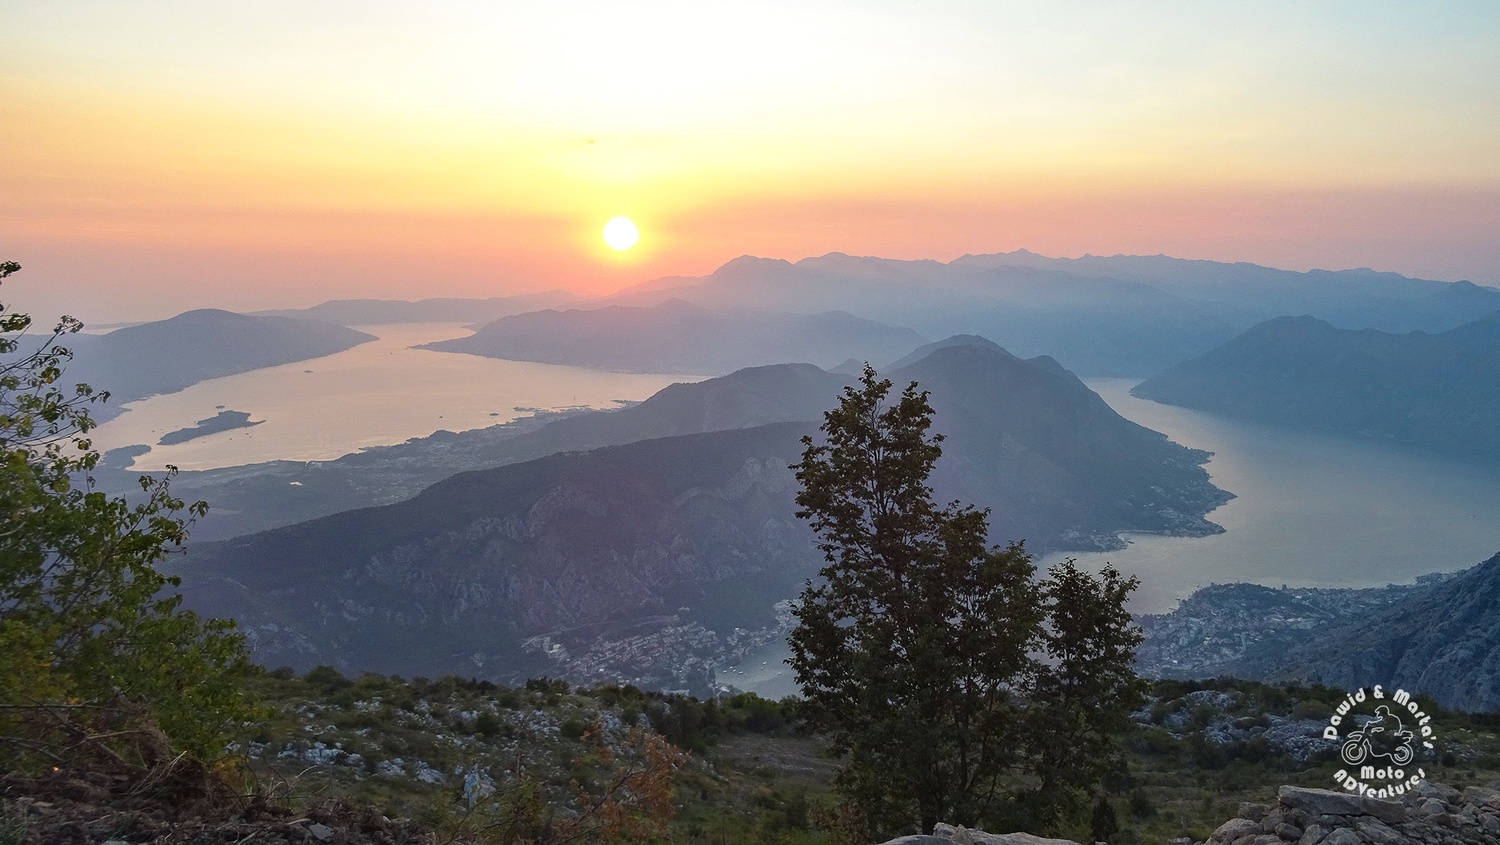 The Kotor bay seen from the road to the Lovcen mountain top